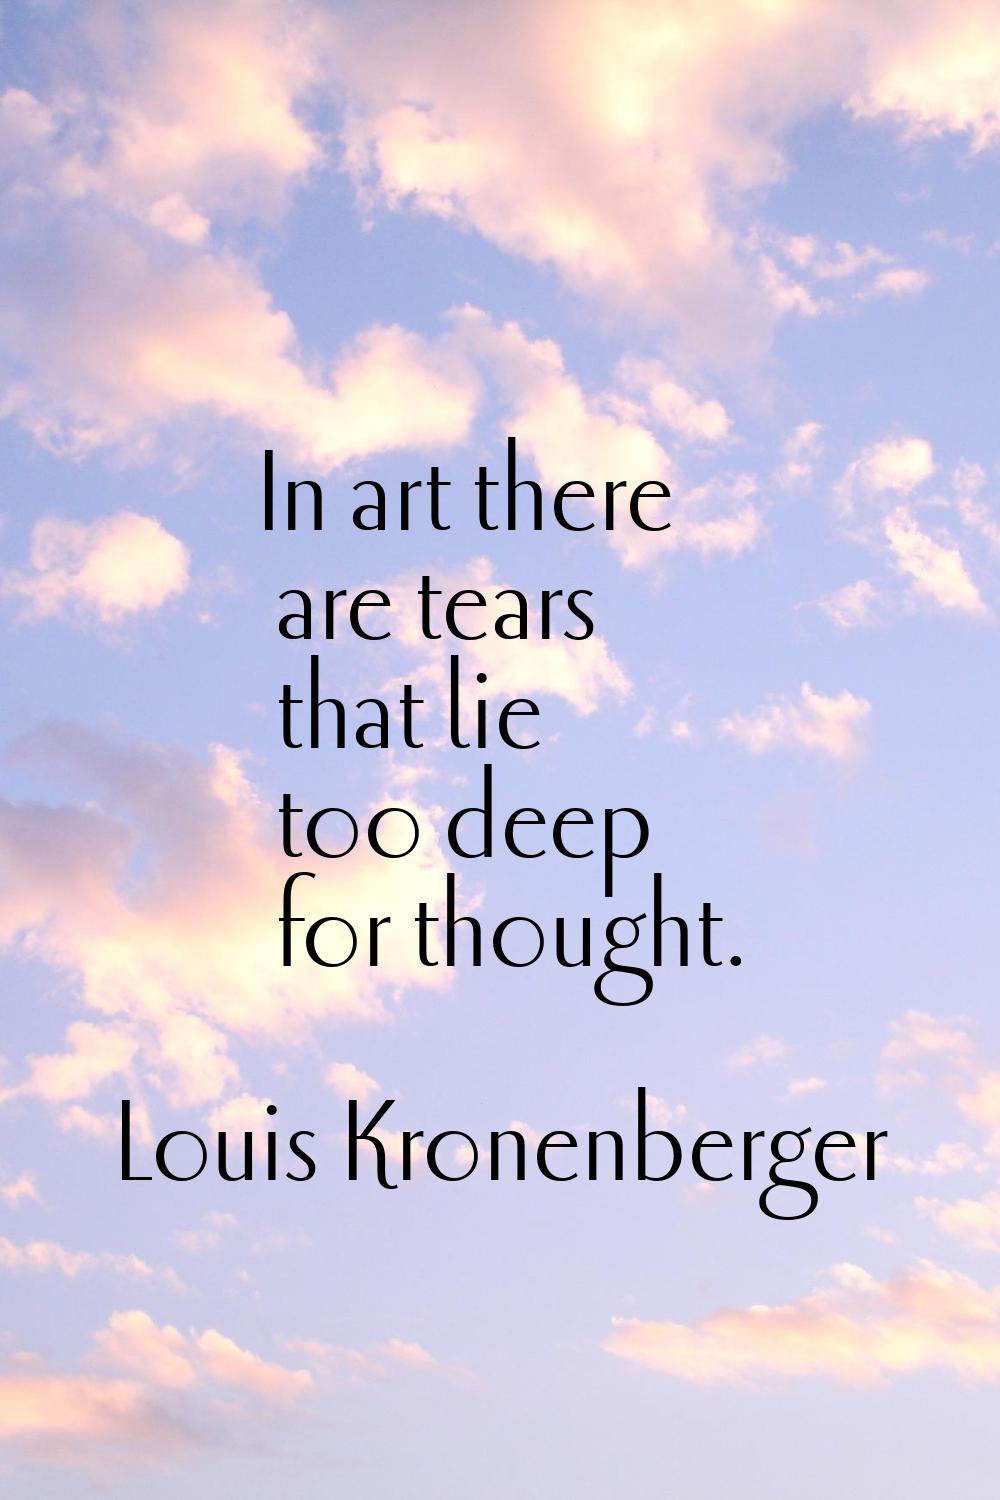 In art there are tears that lie too deep for thought.